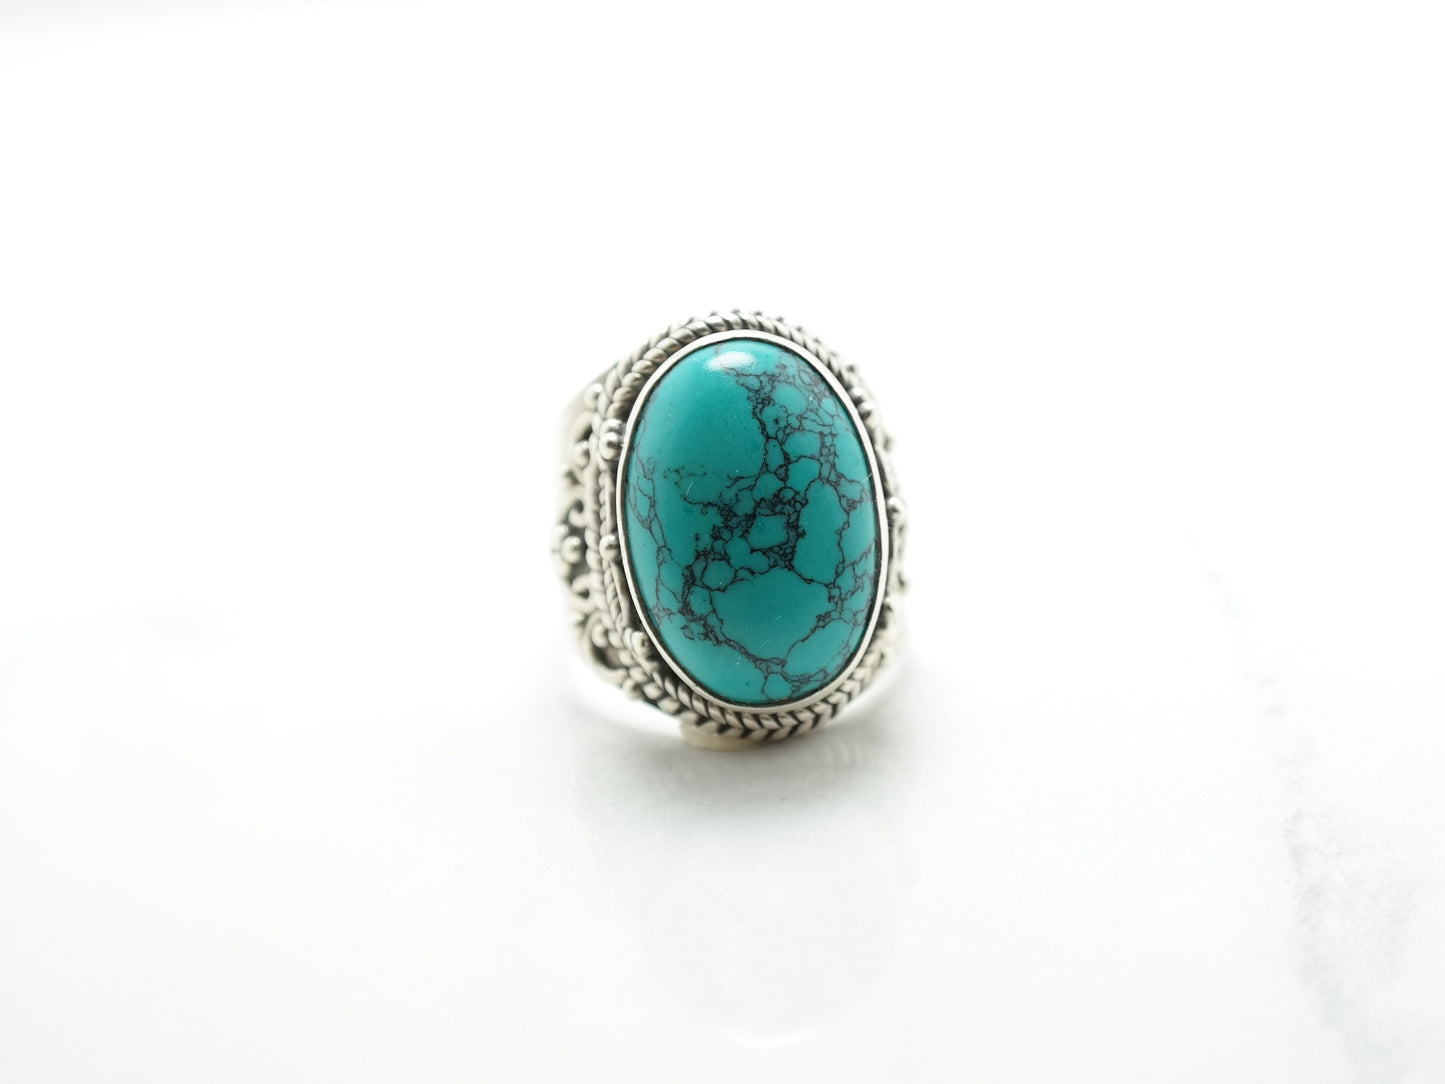 Vintage Southwest Spiderweb Turquoise Sterling Silver Size 8